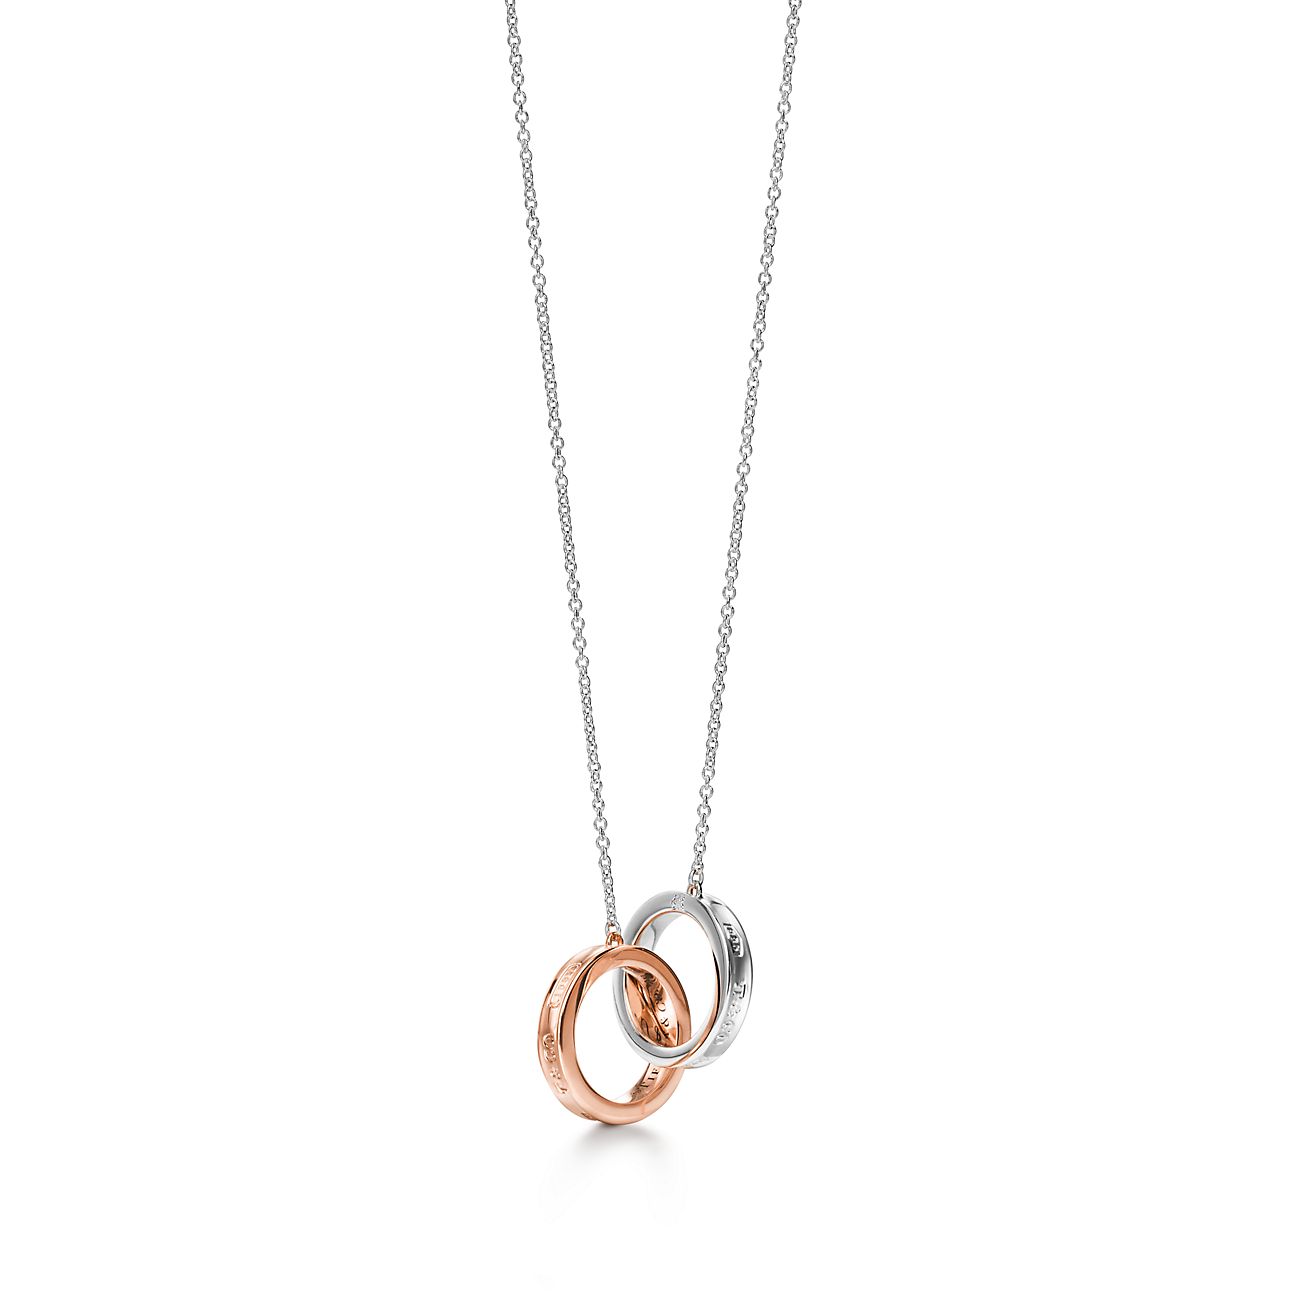 Personalized Engraved Interlocking Circles Necklace - 20589563 | HSN